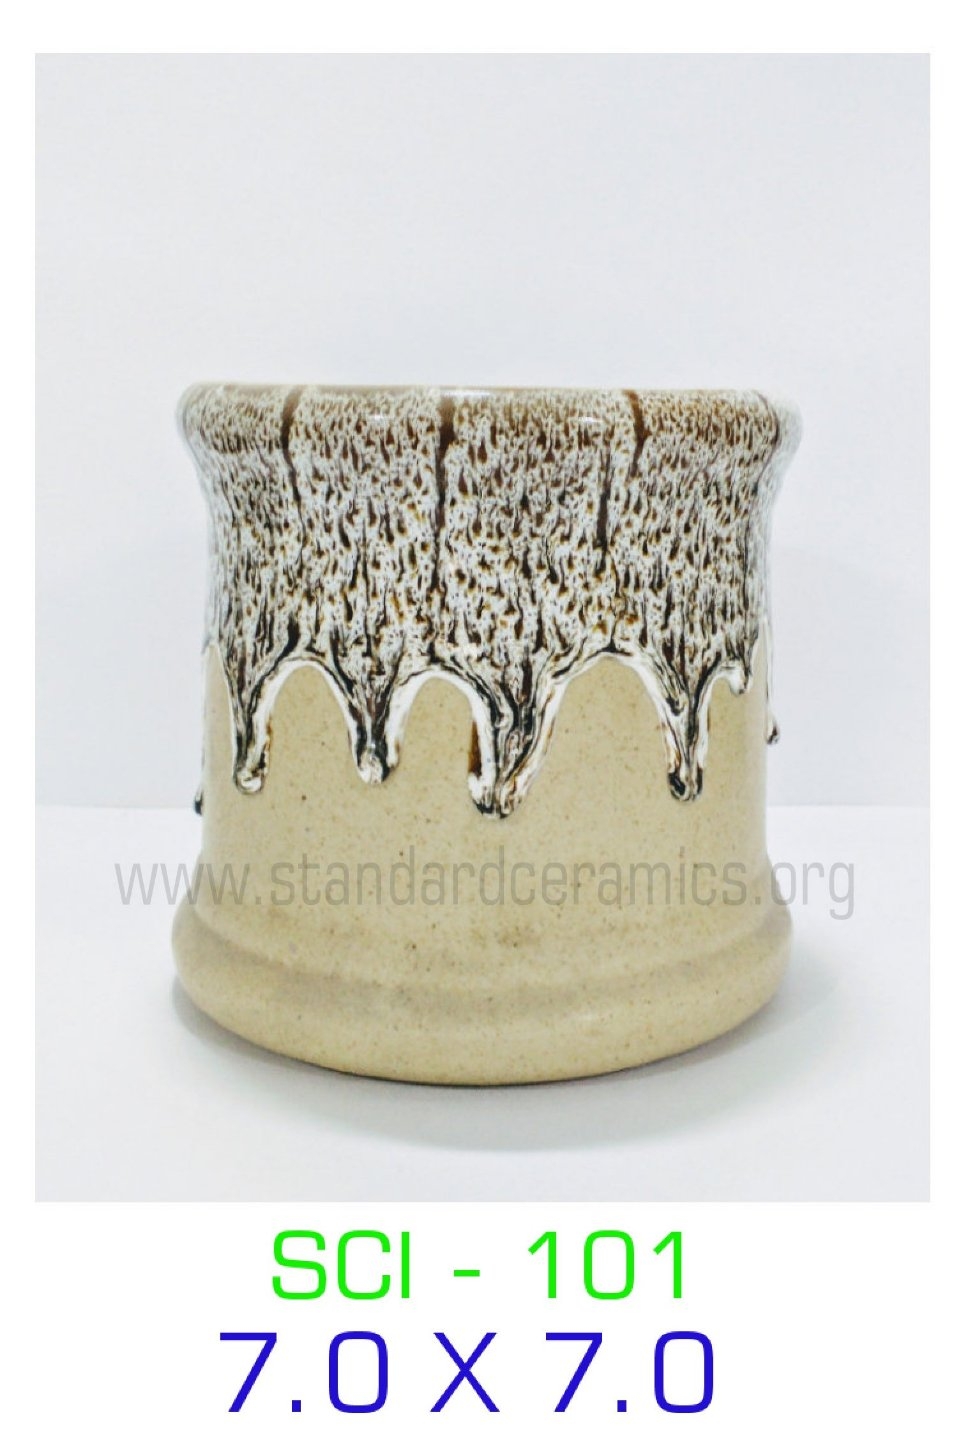 Ceramic Pot Bottom Ring SCI - 101 - H - 8 INCHES,  W - 8 INCHES, Customize